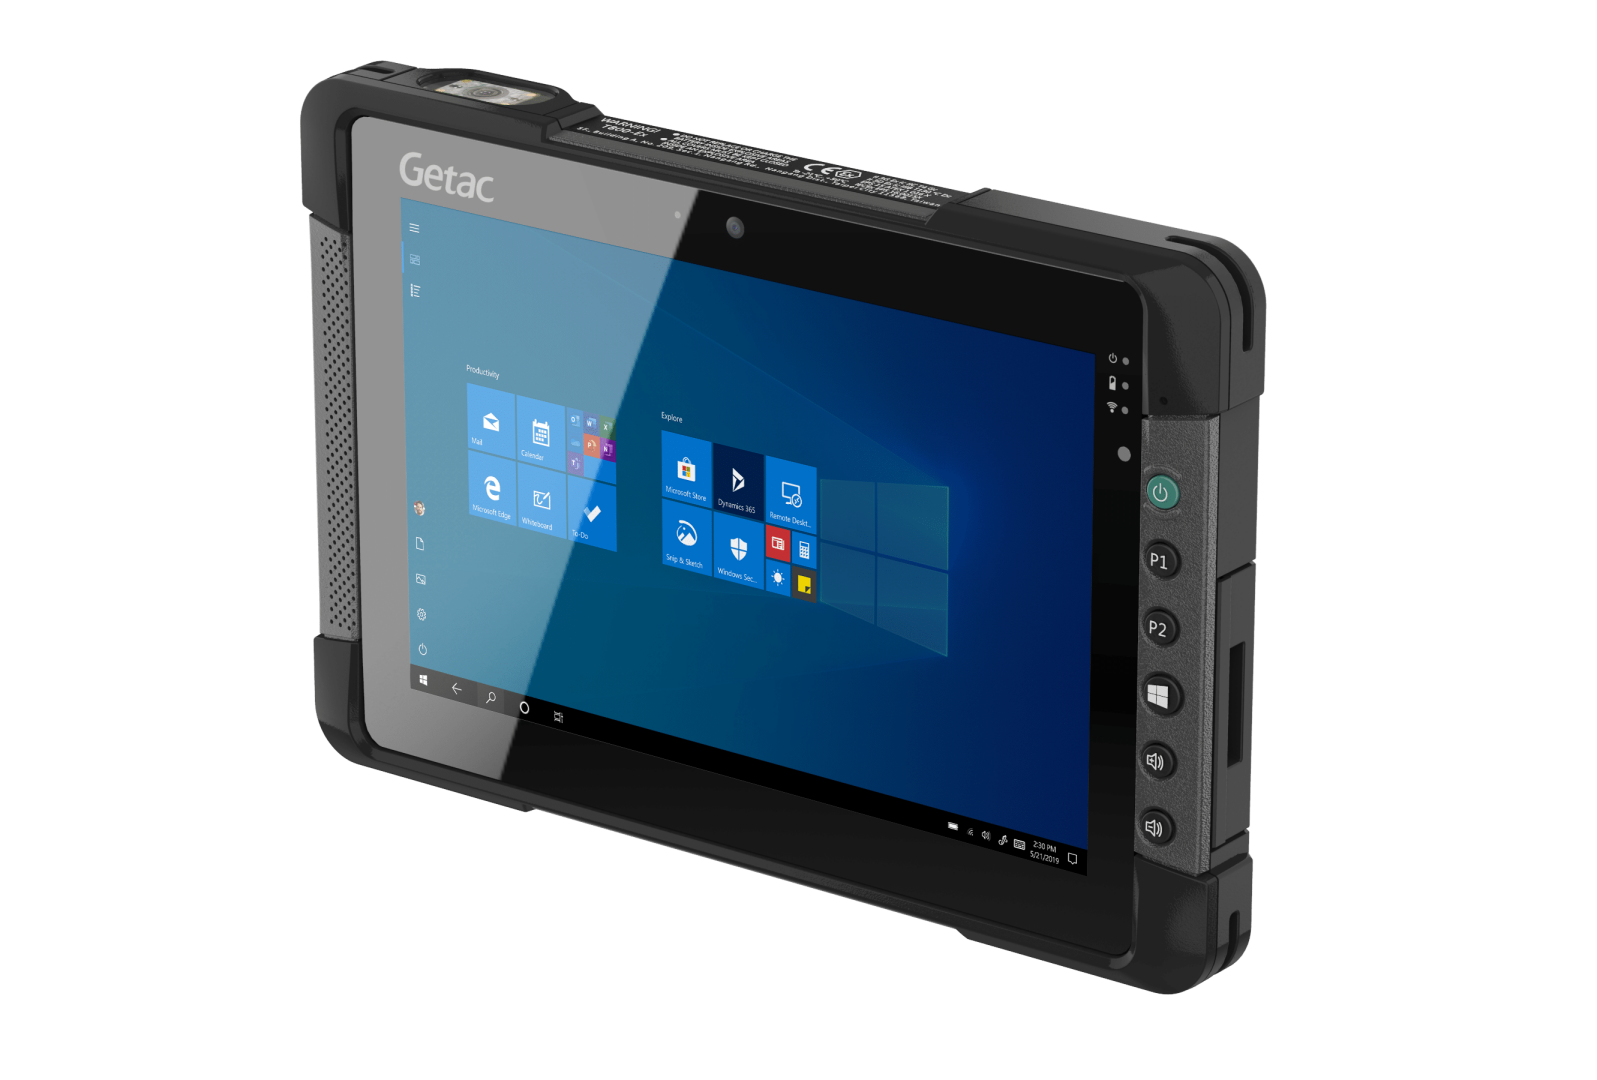 Getac T800 G2 ATEX - Fully Rugged Tablet